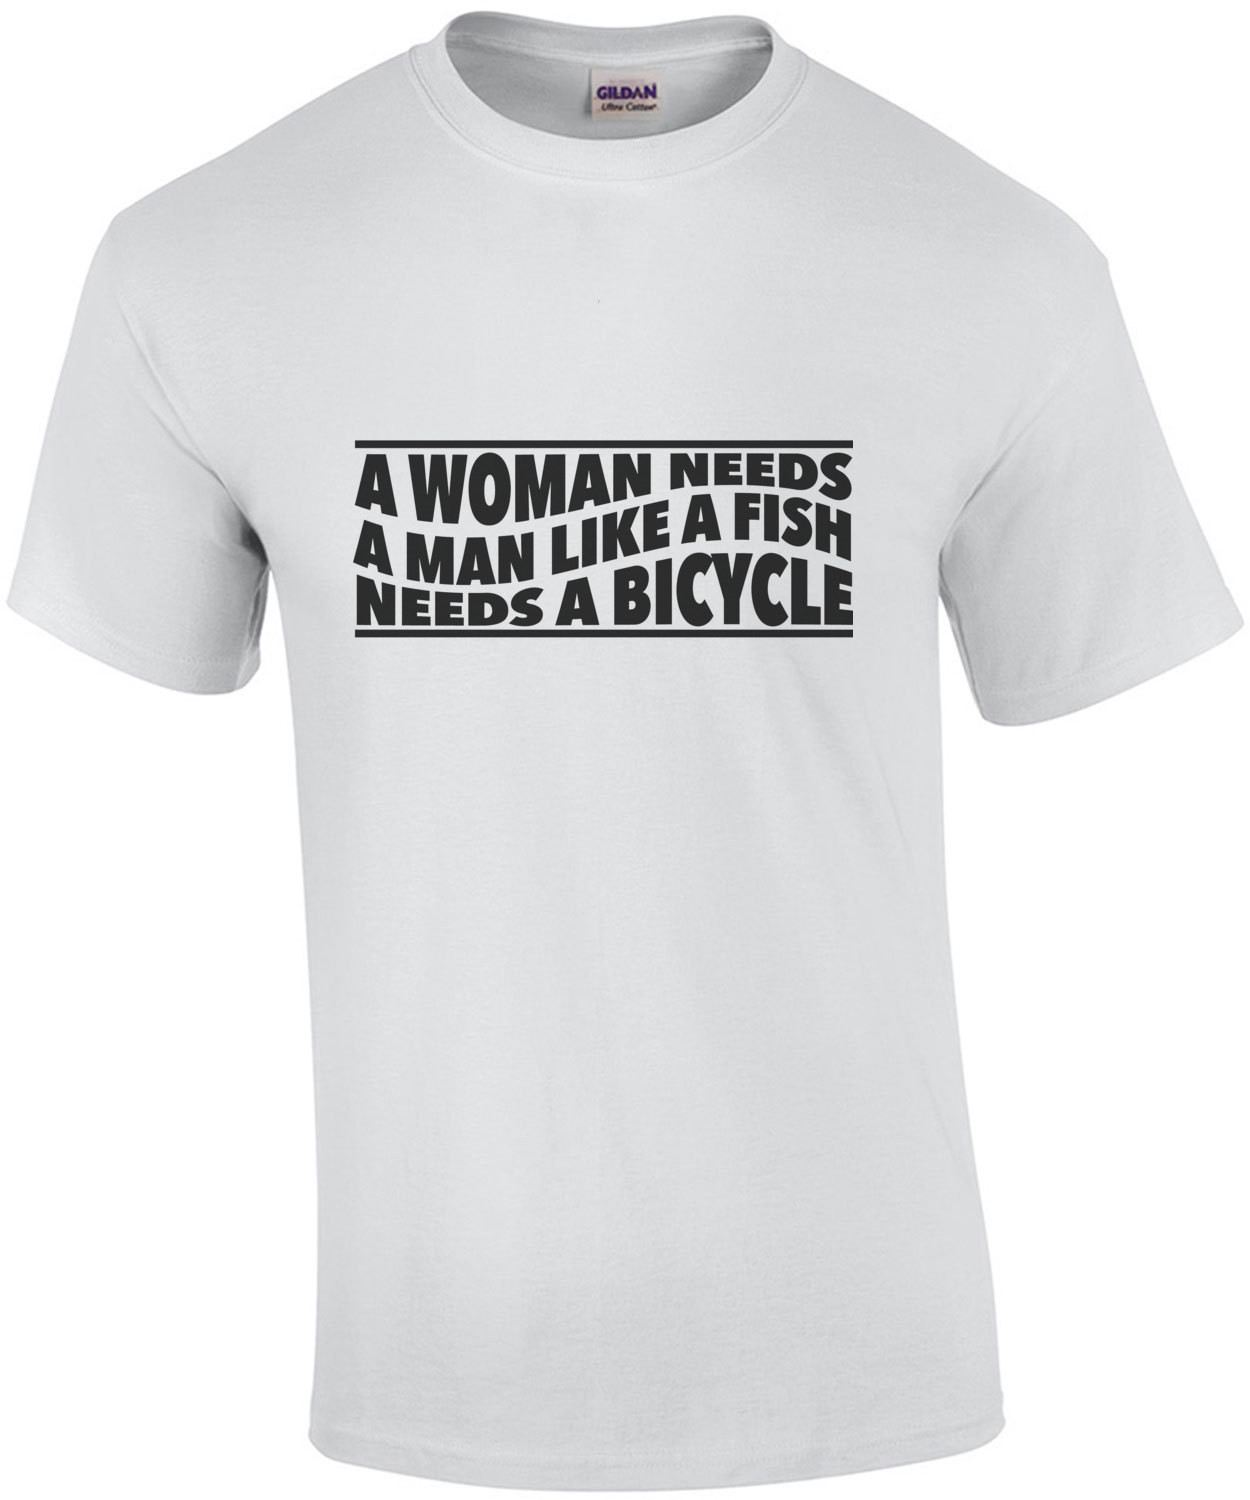 A woman needs a man like a fish needs a bicycle - feminist t-shirt